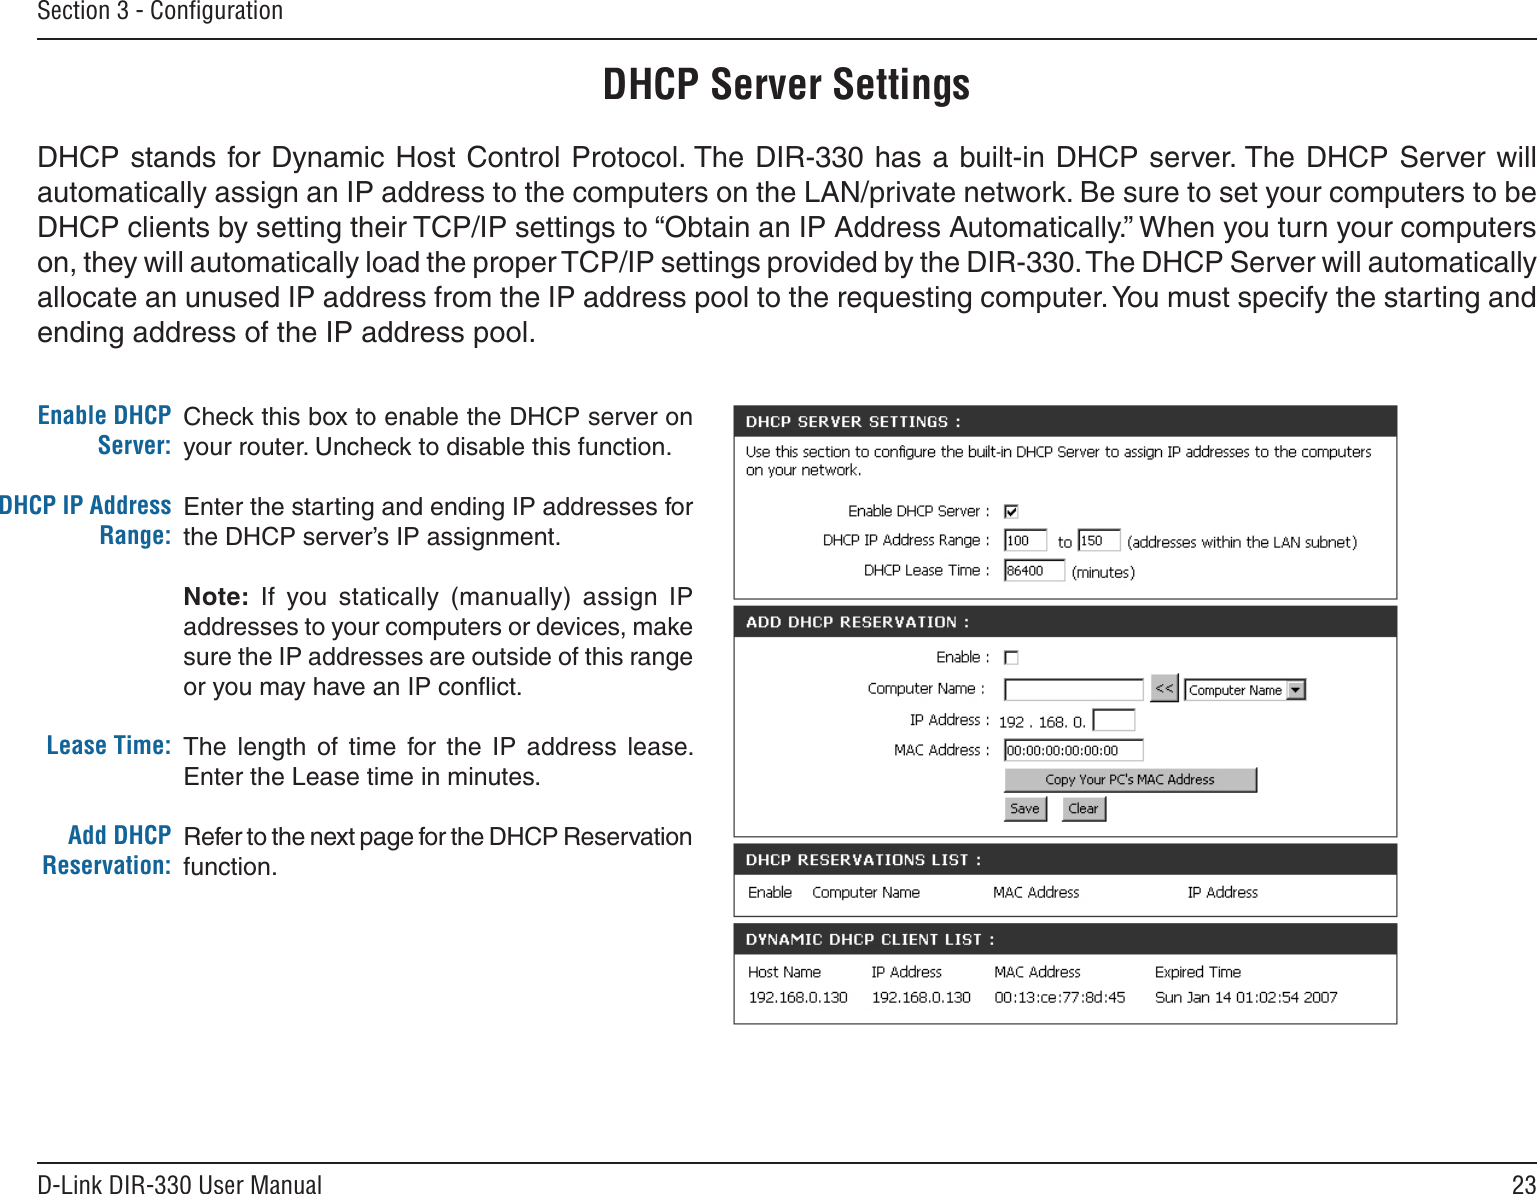 23D-Link DIR-330 User ManualSection 3 - ConﬁgurationCheck this box to enable the DHCP server on your router. Uncheck to disable this function.Enter the starting and ending IP addresses for the DHCP server’s IP assignment.Note:  If  you  statically  (manually)  assign  IP addresses to your computers or devices, make sure the IP addresses are outside of this range or you may have an IP conﬂict. The  length  of  time  for  the  IP  address  lease. Enter the Lease time in minutes.Refer to the next page for the DHCP Reservation function.Enable DHCP Server:DHCP IP Address Range:Lease Time:Add DHCP Reservation:DHCP Server SettingsDHCP stands for Dynamic Host Control Protocol. The DIR-330 has a built-in DHCP server. The DHCP Server will automatically assign an IP address to the computers on the LAN/private network. Be sure to set your computers to be DHCP clients by setting their TCP/IP settings to “Obtain an IP Address Automatically.” When you turn your computers on, they will automatically load the proper TCP/IP settings provided by the DIR-330. The DHCP Server will automatically allocate an unused IP address from the IP address pool to the requesting computer. You must specify the starting and ending address of the IP address pool.